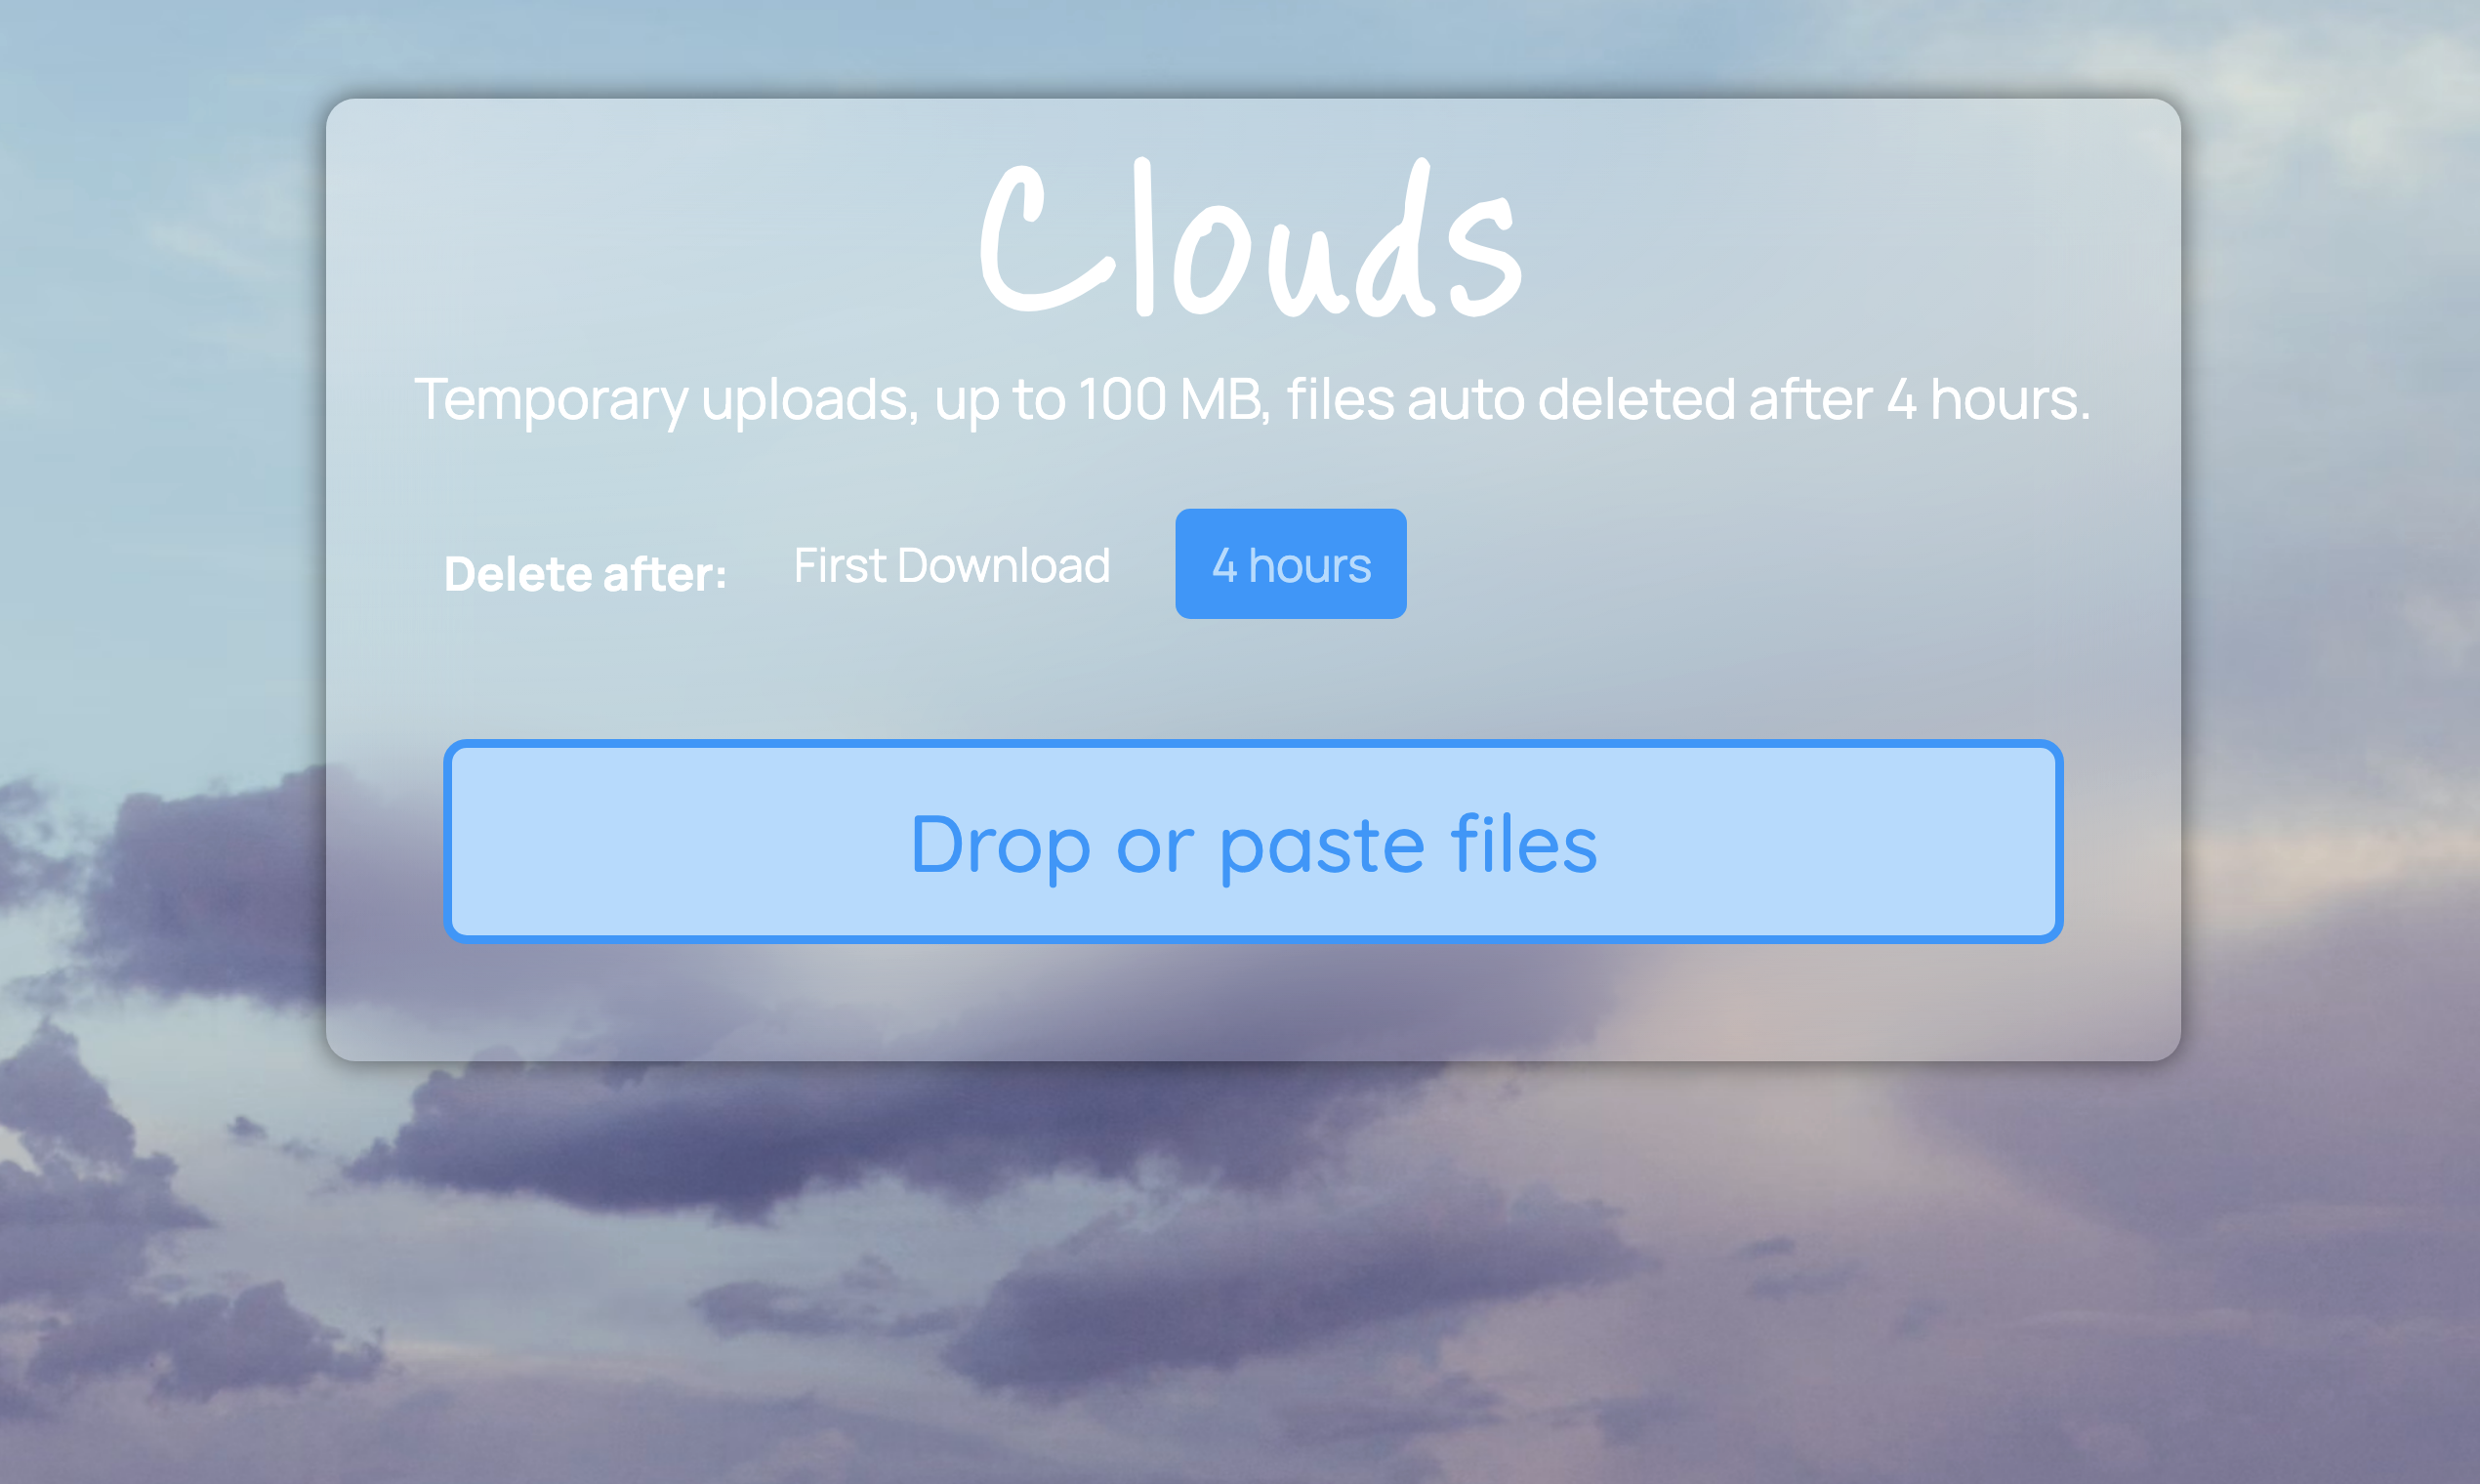 startuptile Clouds-Simple & handy temporary file uploads